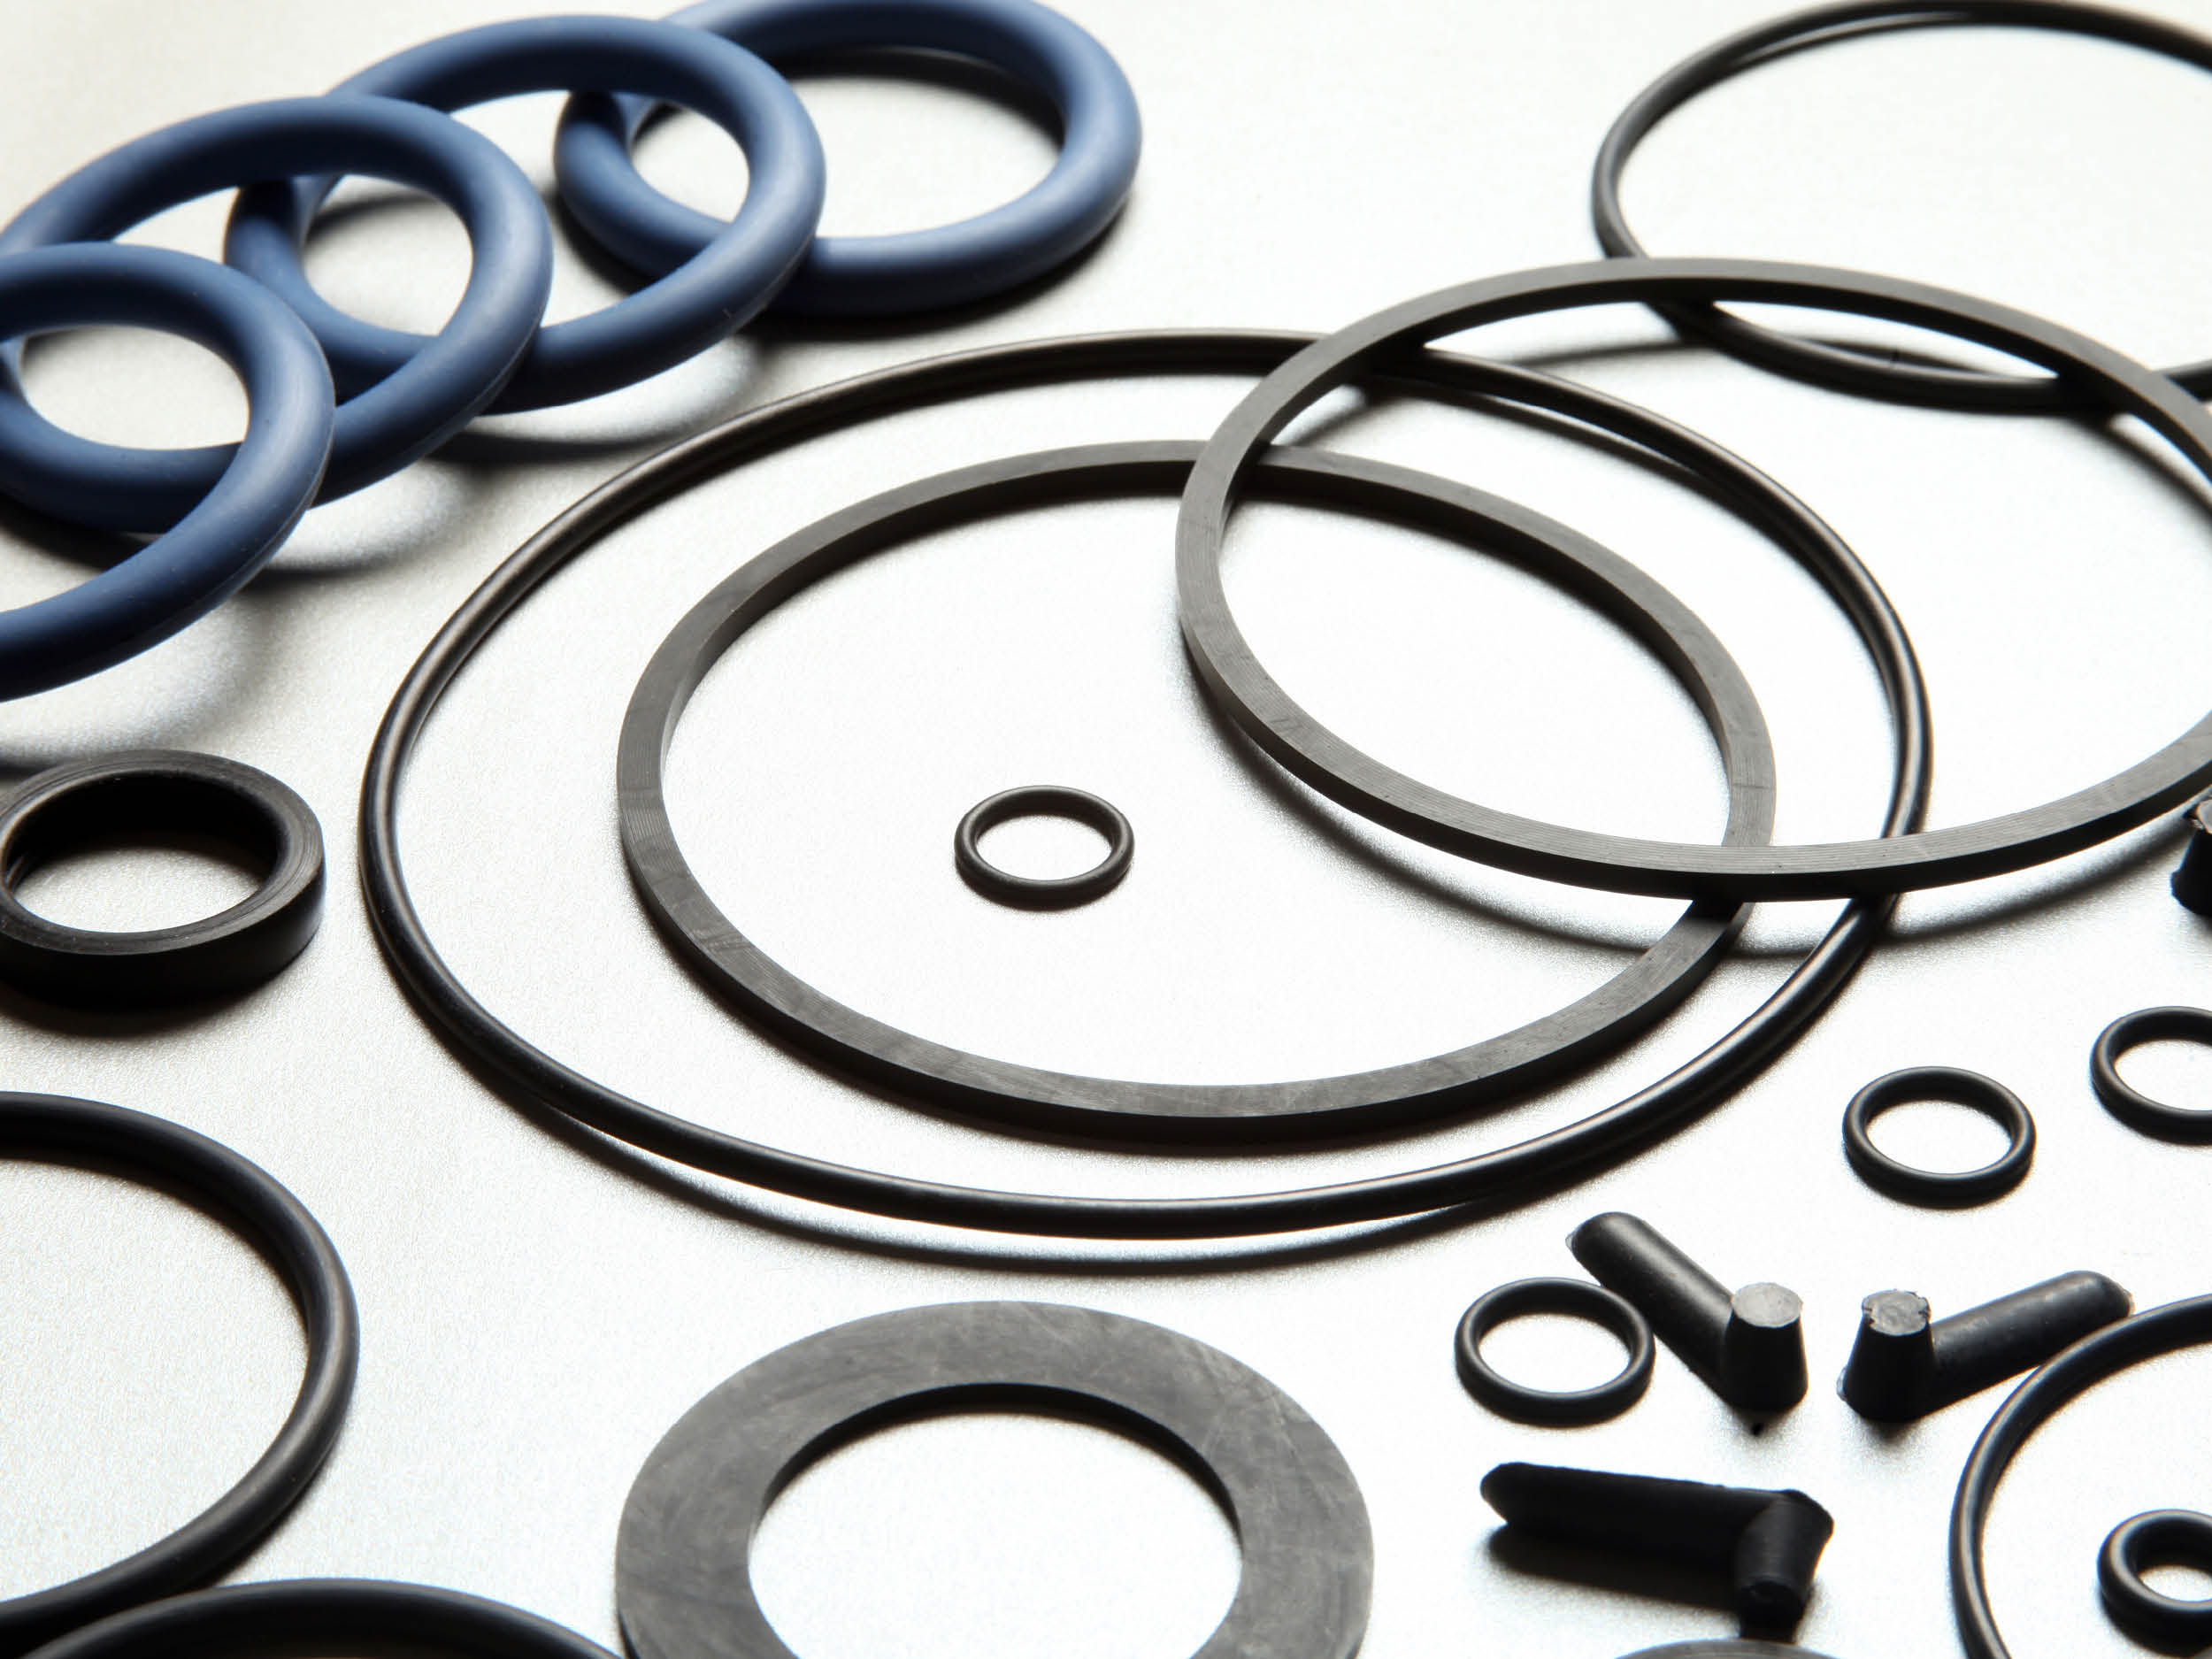 How to Choose Your O-Ring for the Ideal Seal